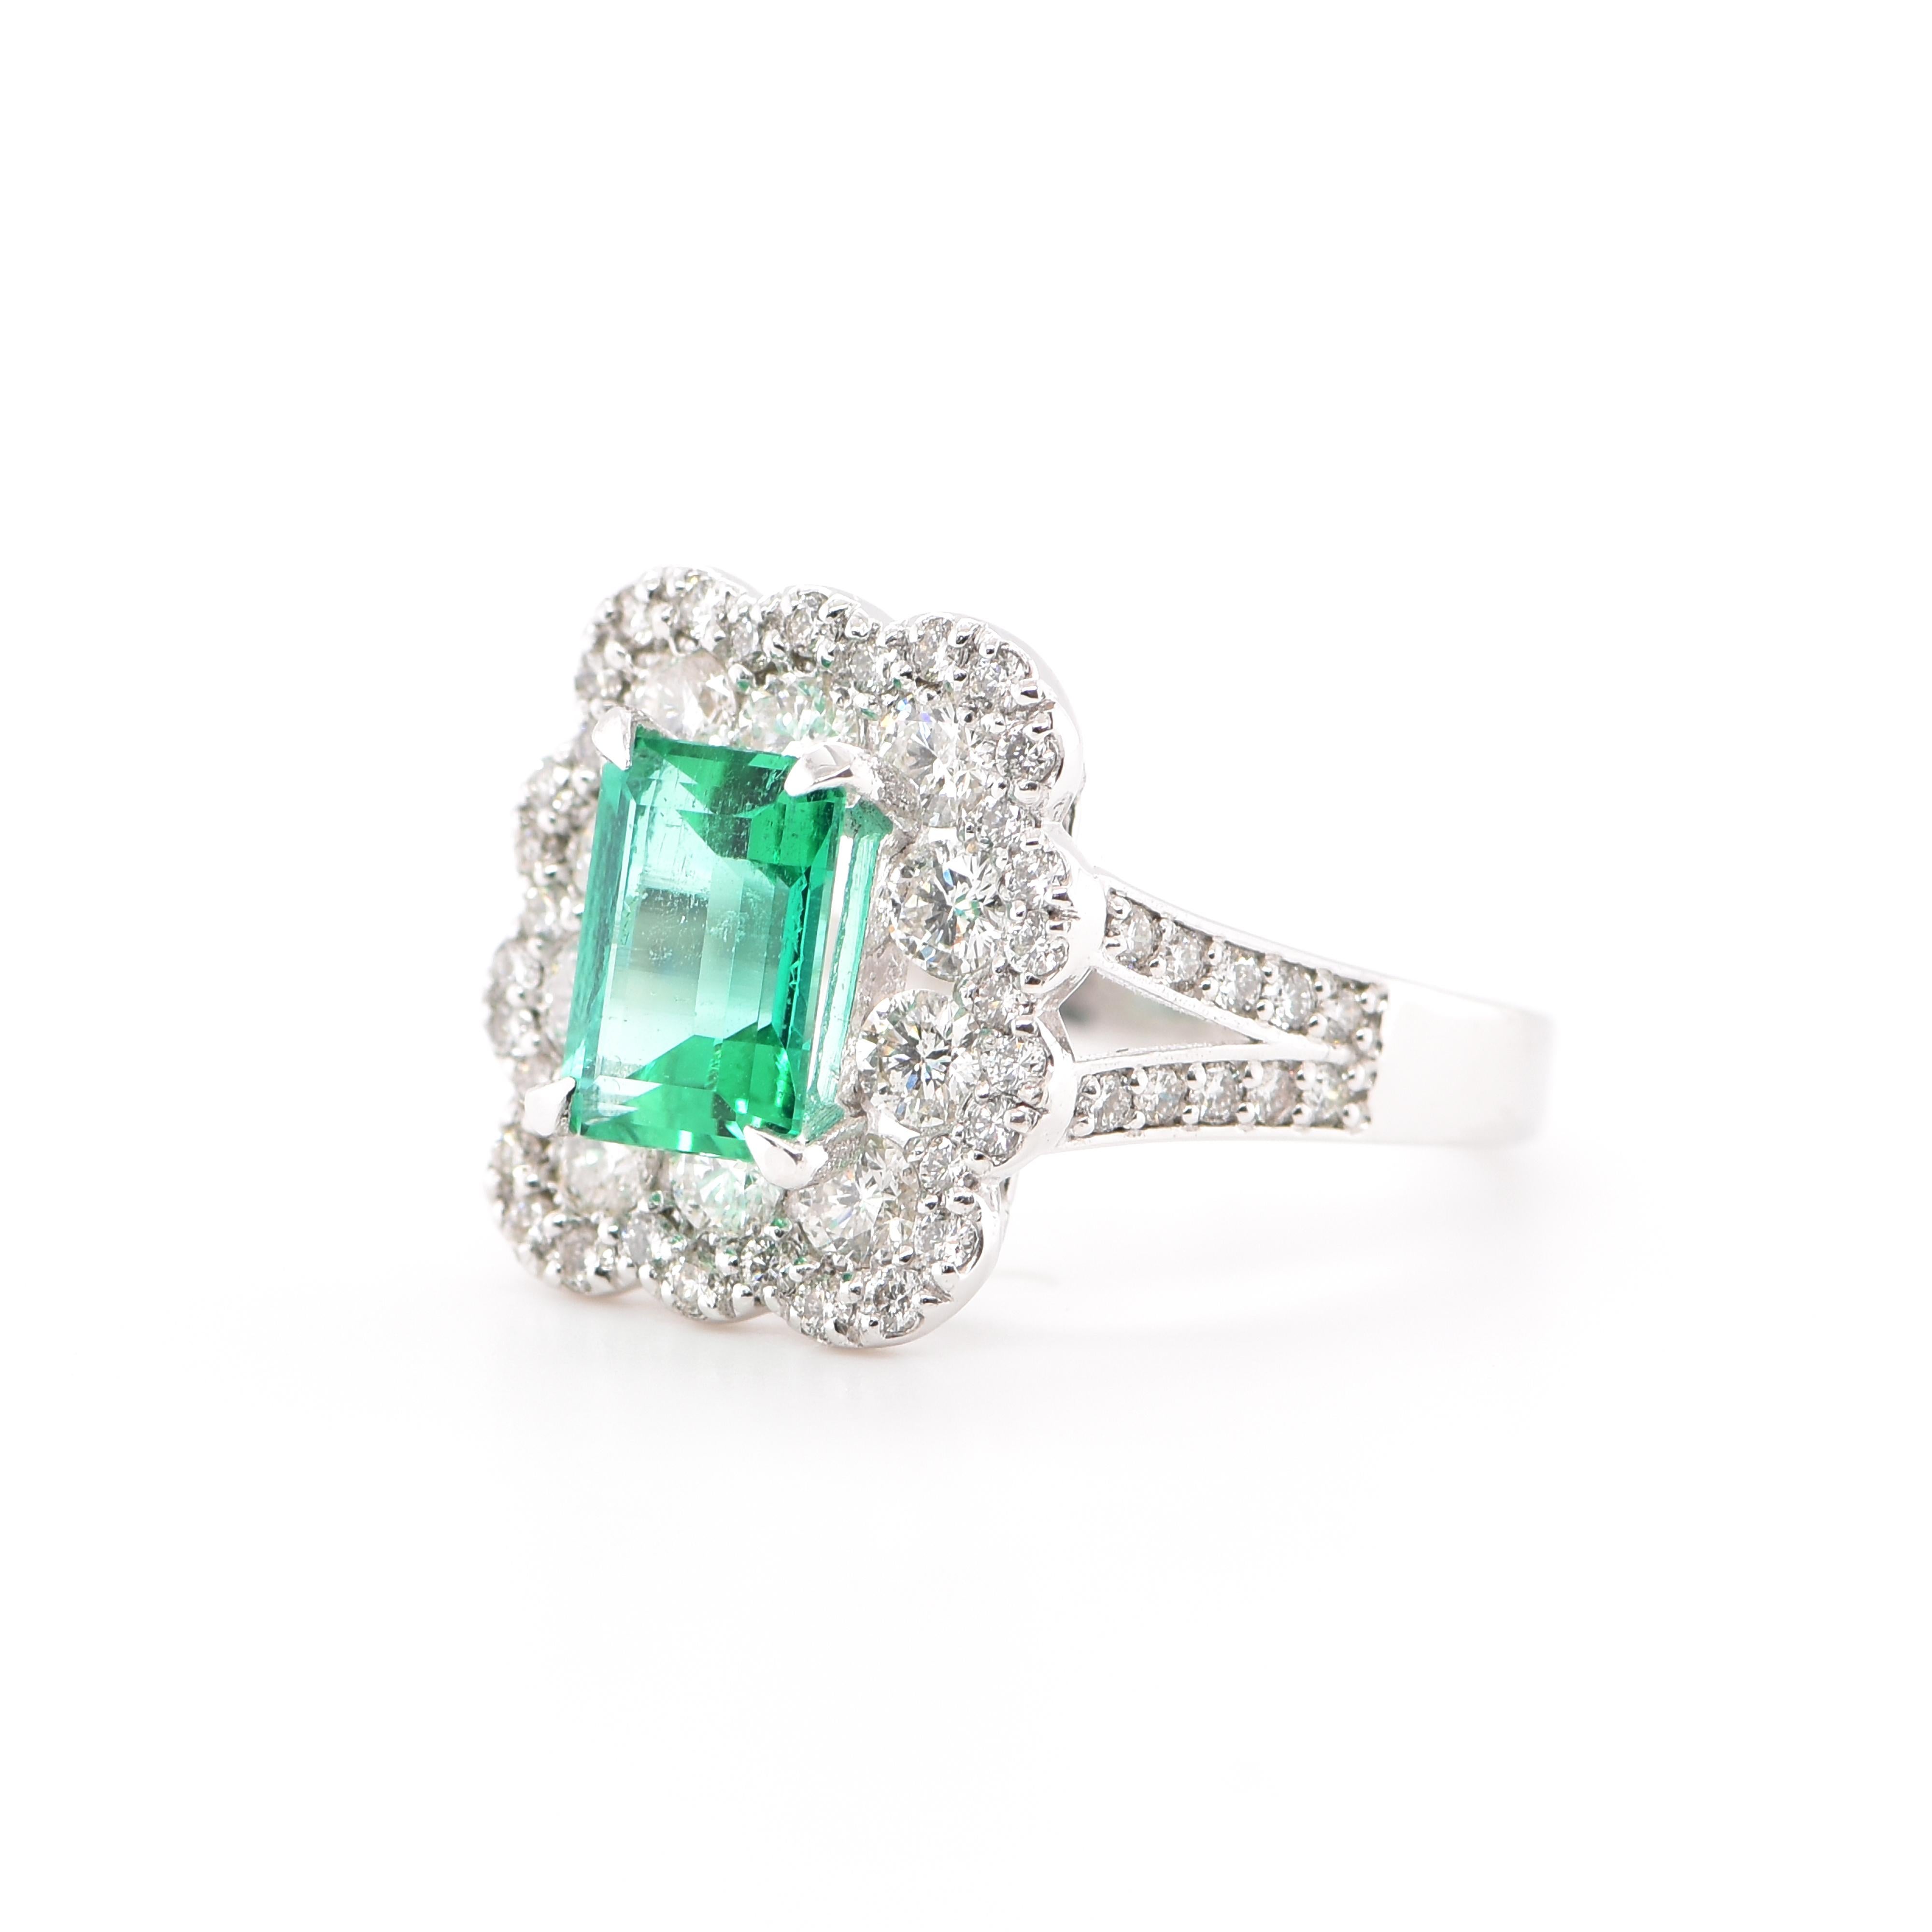 A stunning Ring featuring a 1.23 Carat Natural, Colombian Emerald and 1.13 Carats of Diamond Accents set in Platinum. People have admired emerald’s green for thousands of years. Emeralds have always been associated with the lushest landscapes and